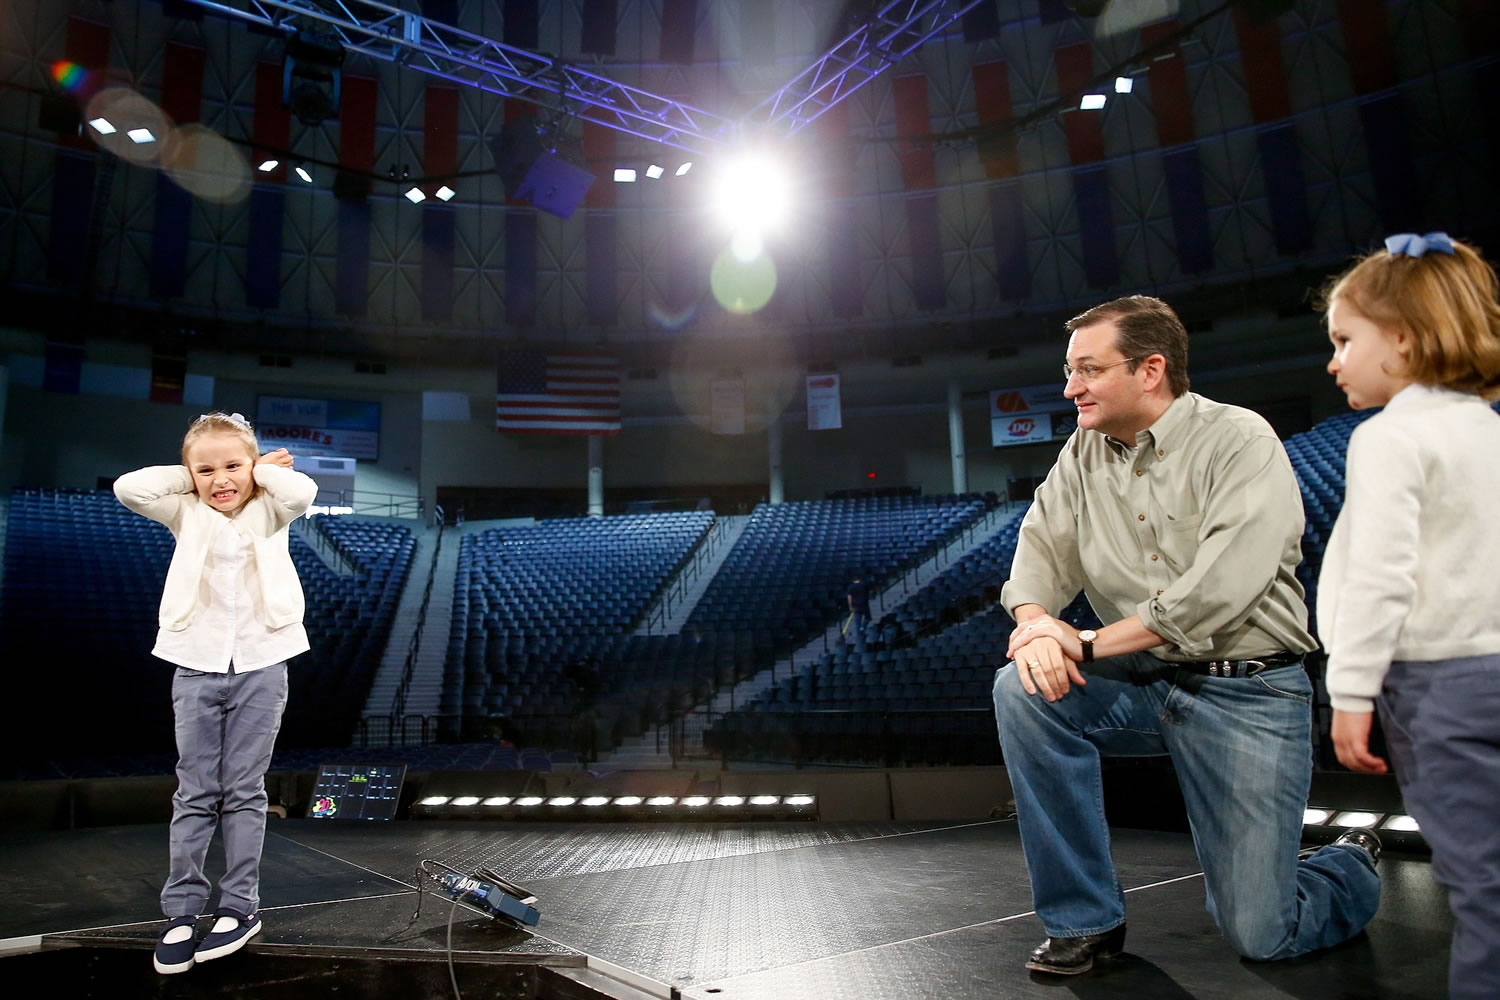 Caroline Cruz, 6, pretends to react to noise as Sen. Ted Cruz, R-Texas, tells her and her sister, Catherine, 4, right, how loud and crowded it will be for Cruz's Monday morning speech where he is expected to launch his campaign for U.S. president, during a walk-through on stage at Liberty University on Sunday in Lynchburg, Va.